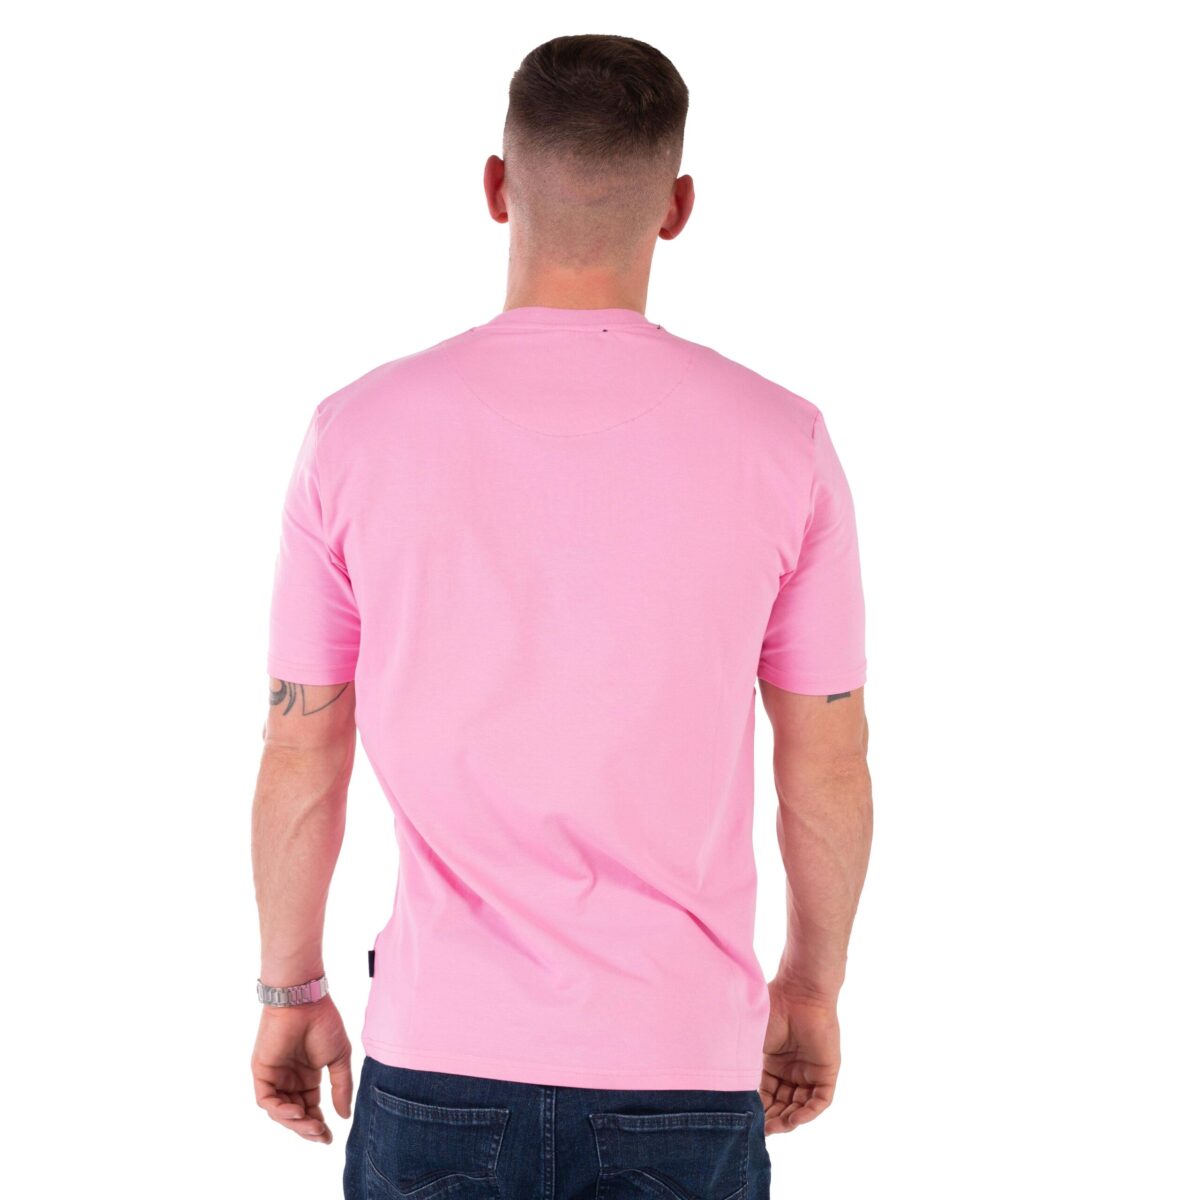 Rous Pink Stretch Tee